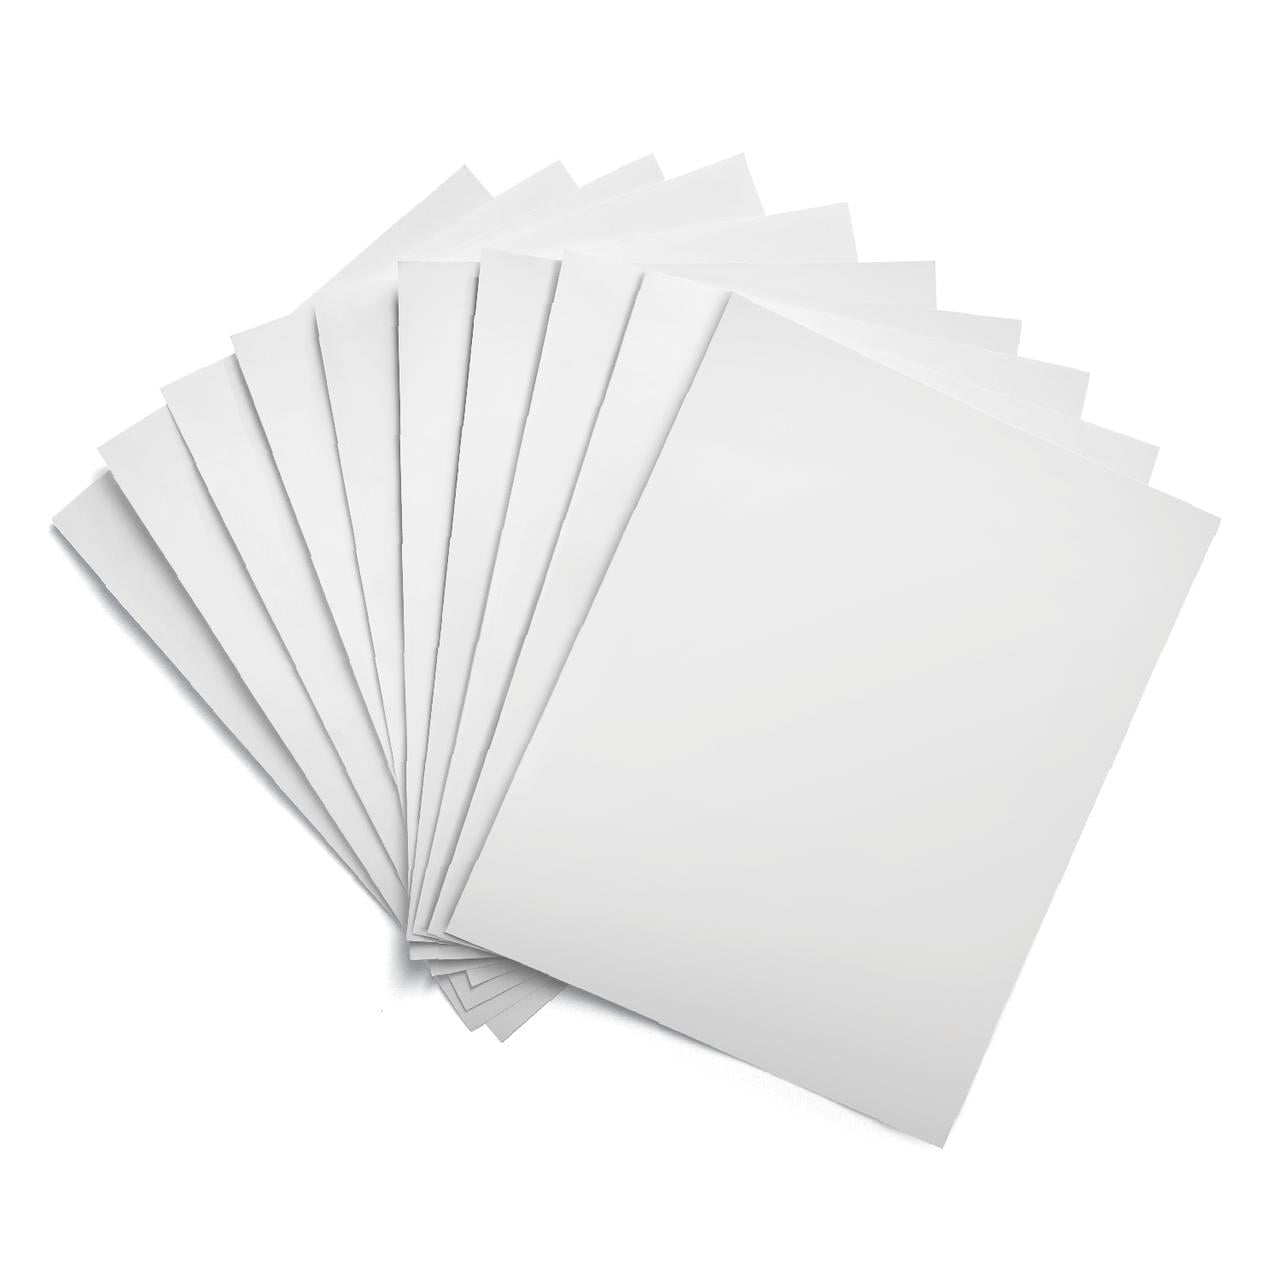 Poster Board, White 10pt., 14 x 22, 100 Sheets - PACCAR93736